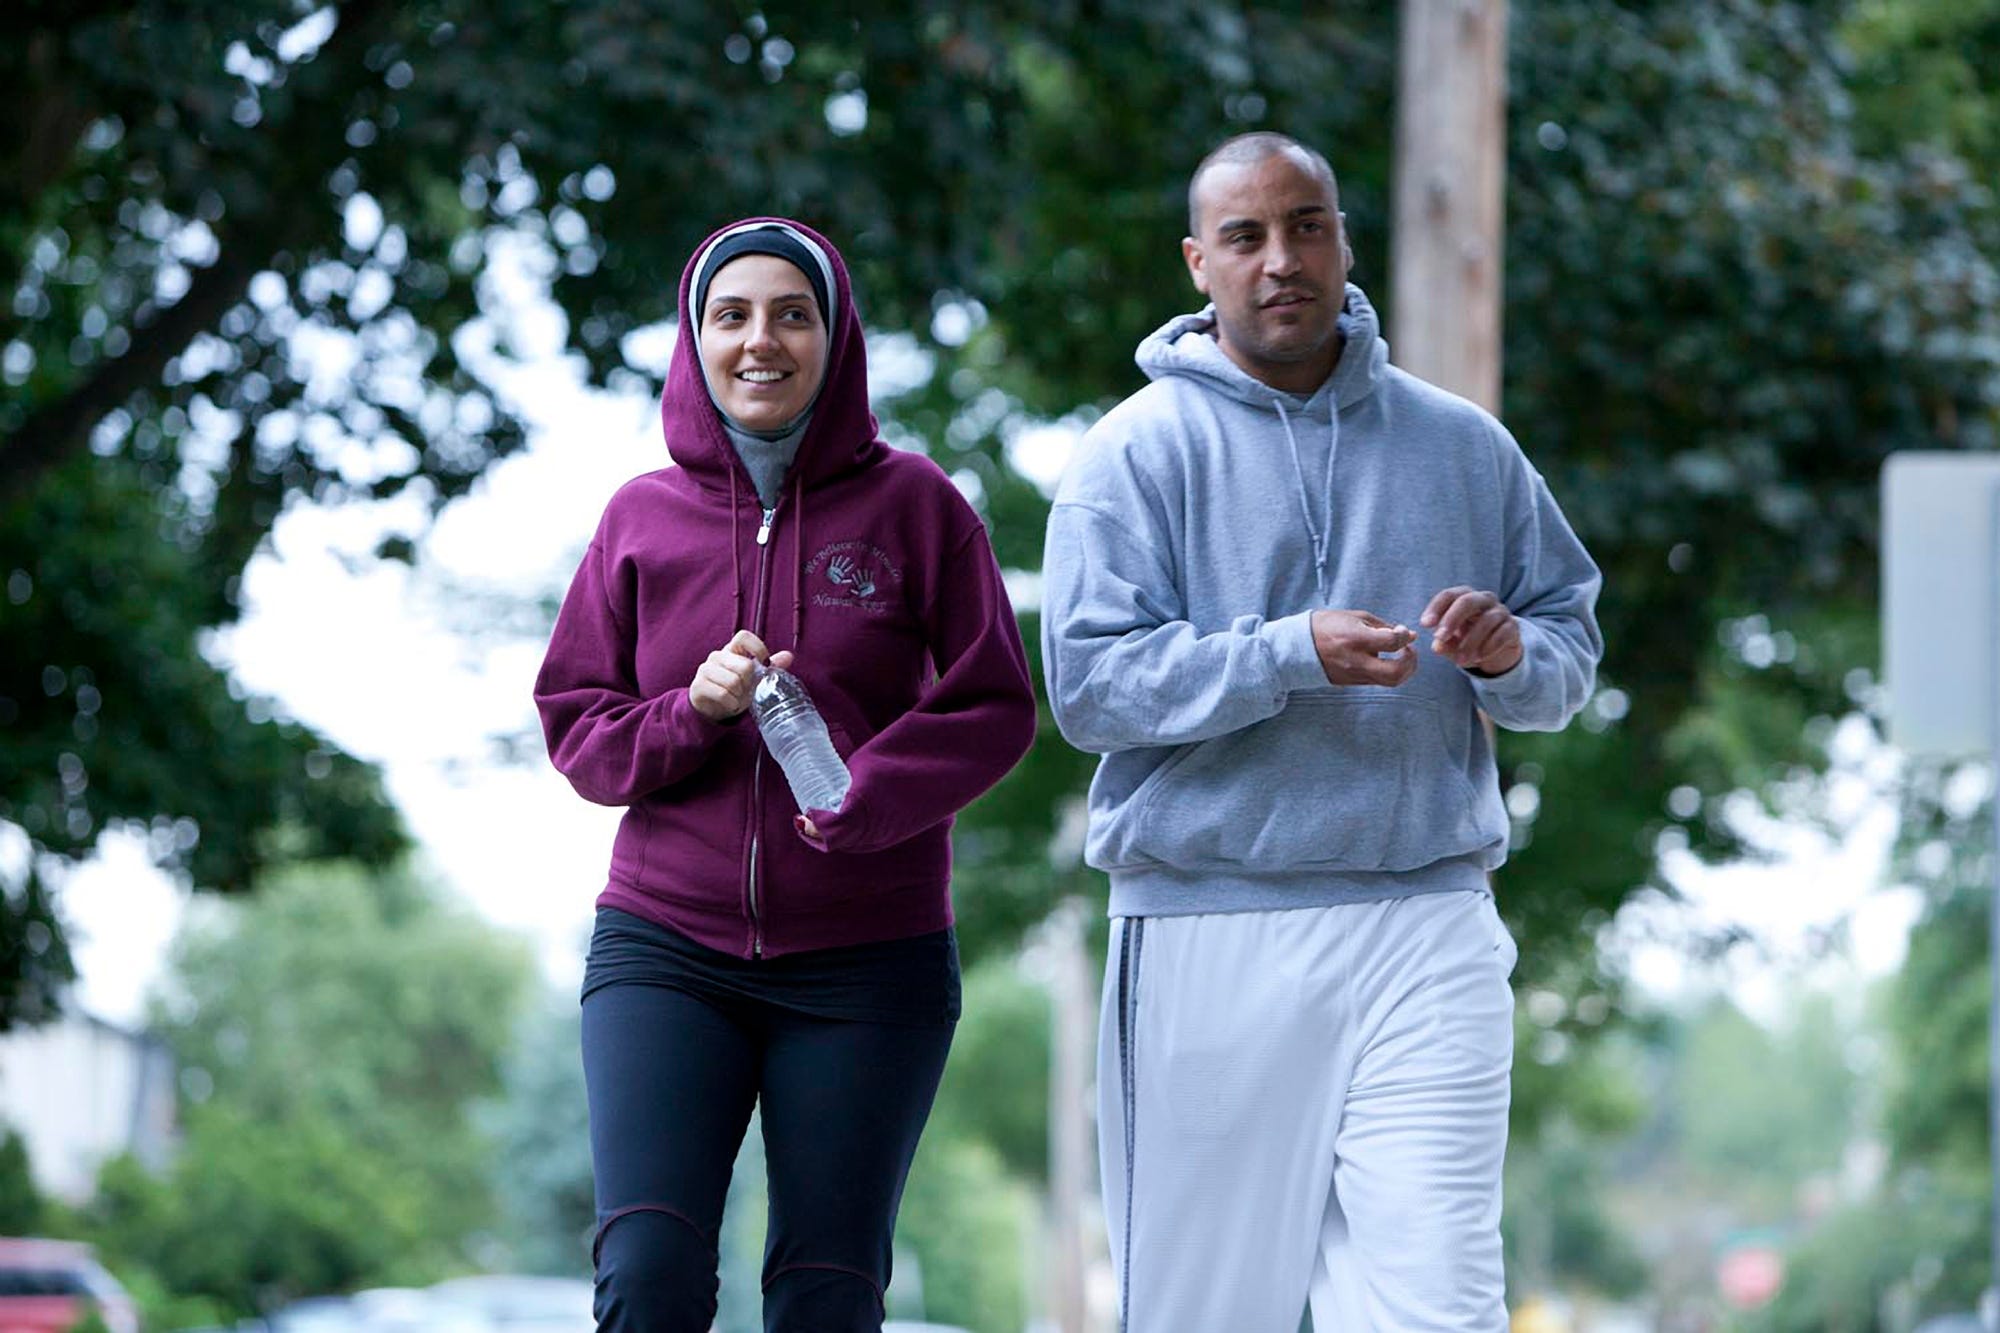 Nawal Aoude, a pediatric respiratory therapist, left, and her husband Nader go for a walk in a scene from the TLC series 